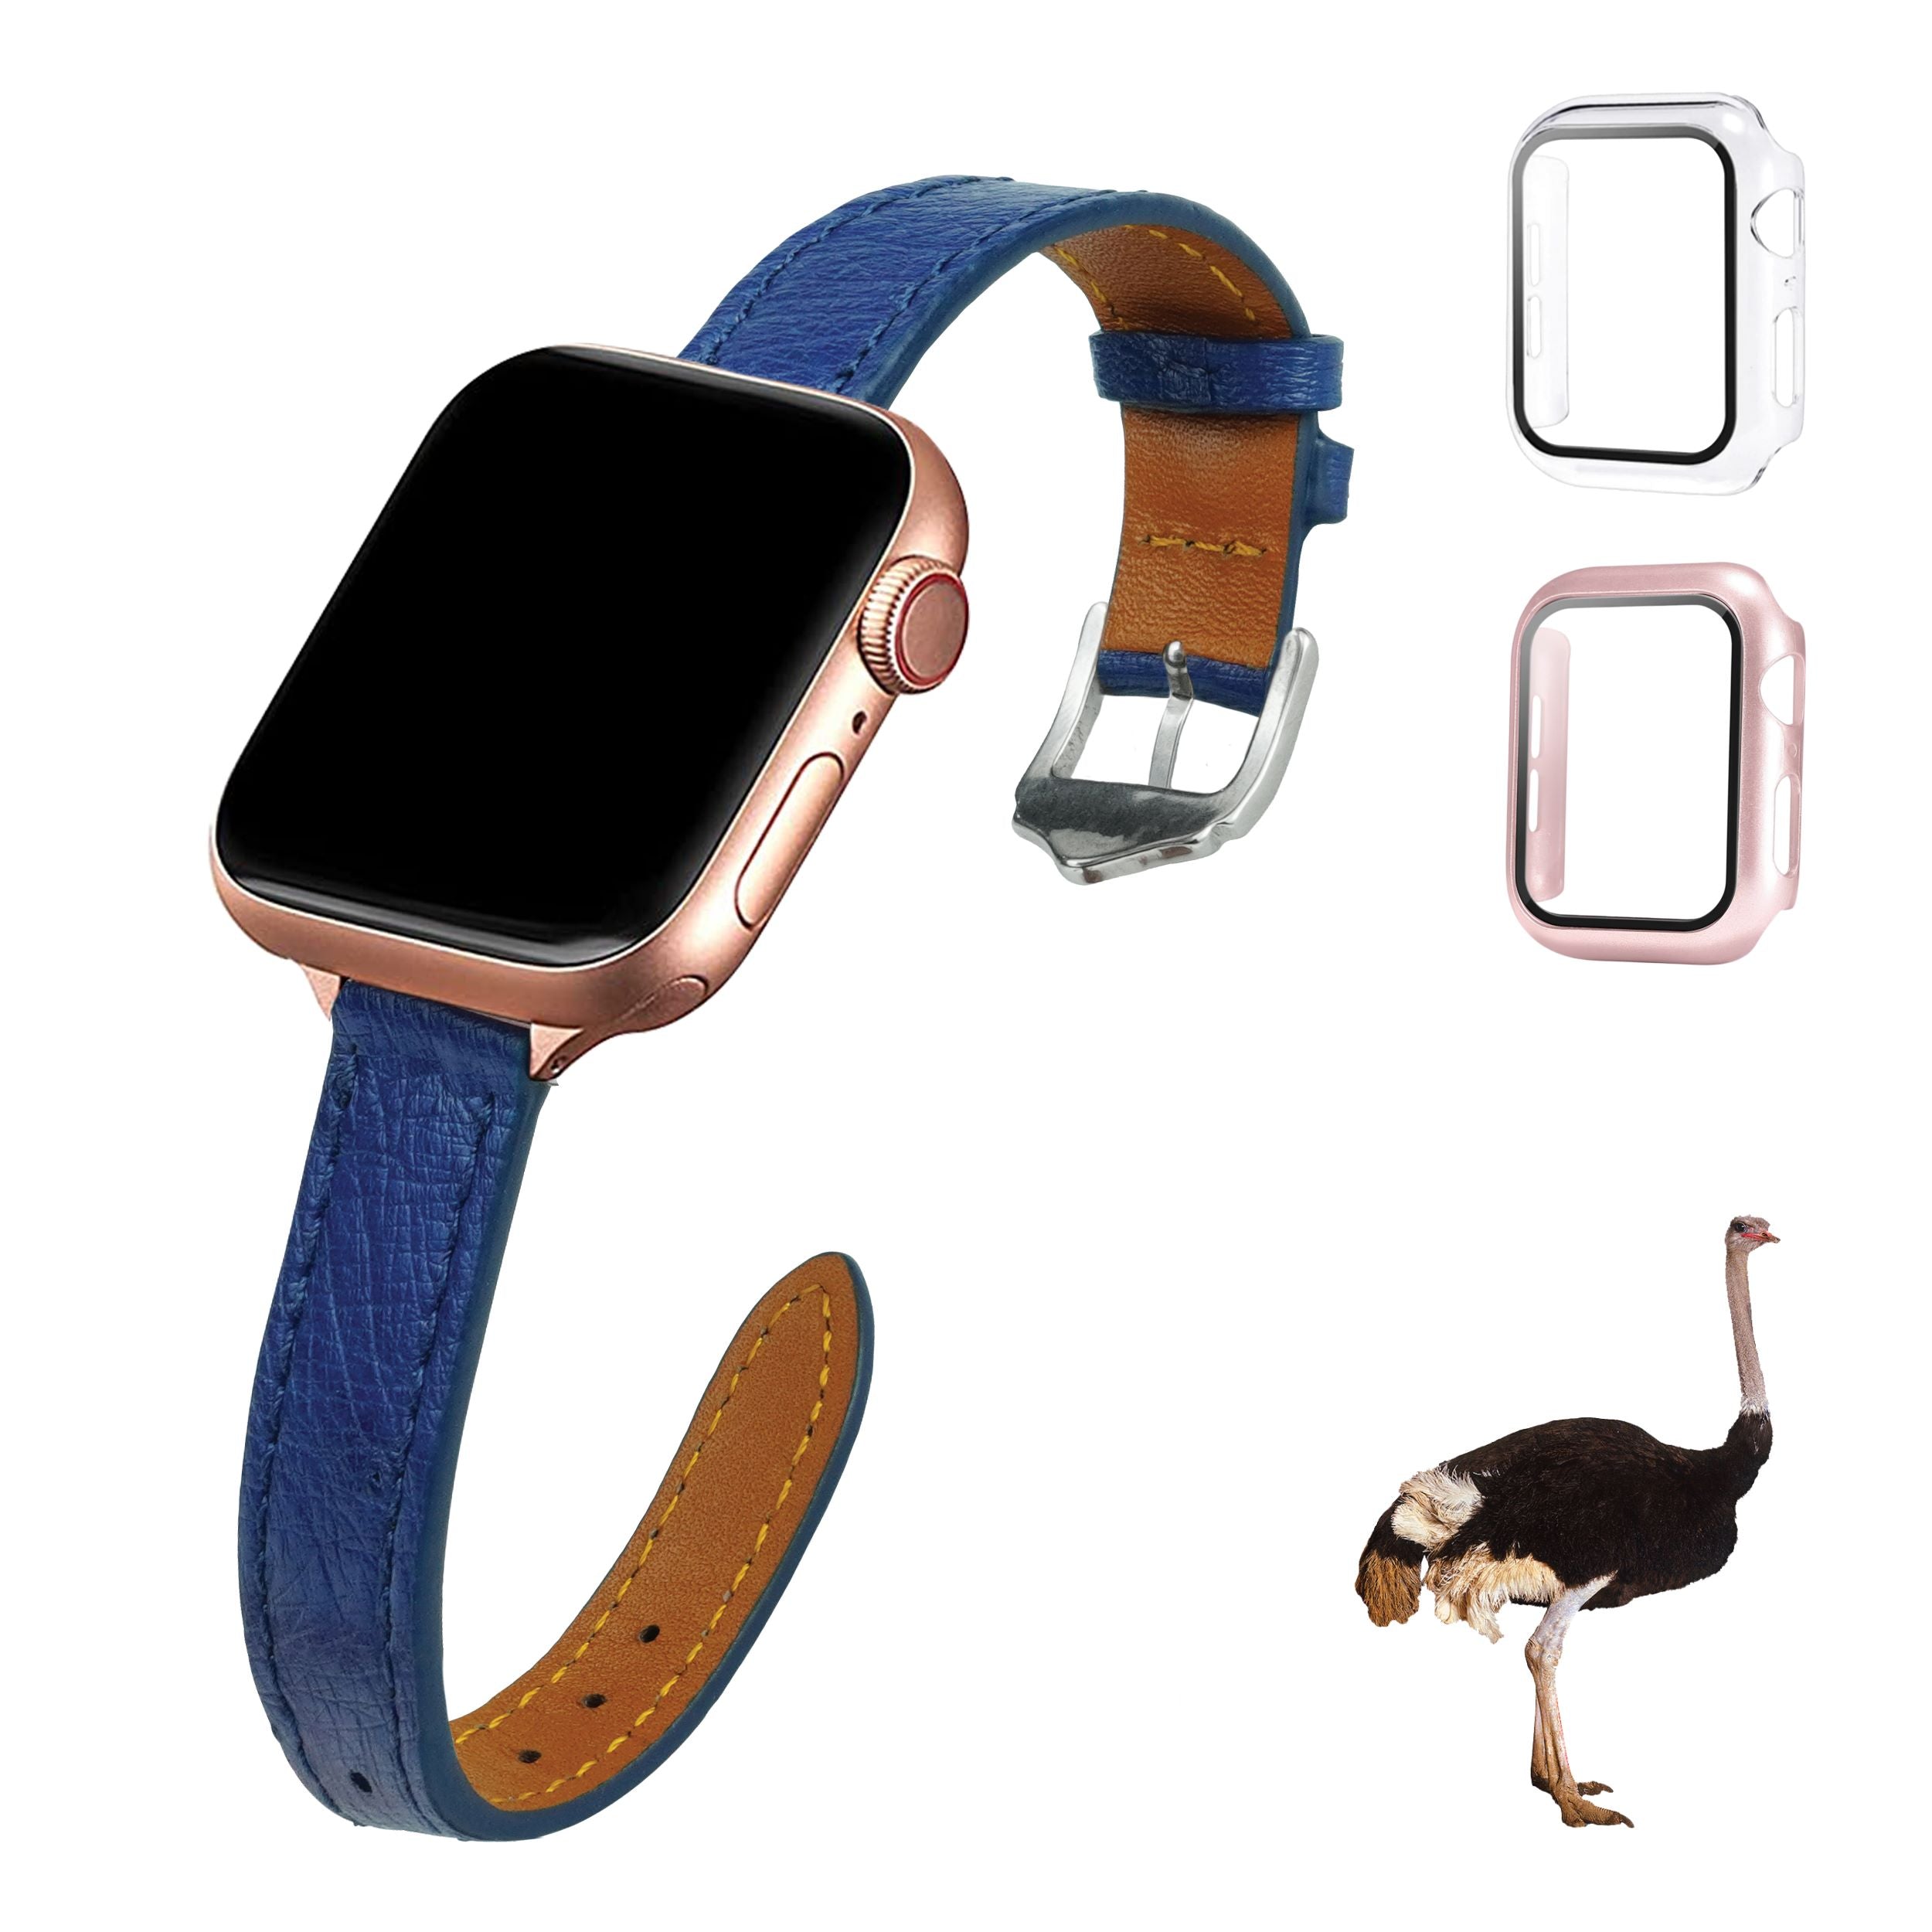 Blue Flat Ostrich Leather Band Compatible Apple Watch Iwatch 40mm Screen Protector Case Black Adapter Replacement Strap For Smartwatch Series 4 5 6 SE Leather Handmade AW-184S-W-40MM